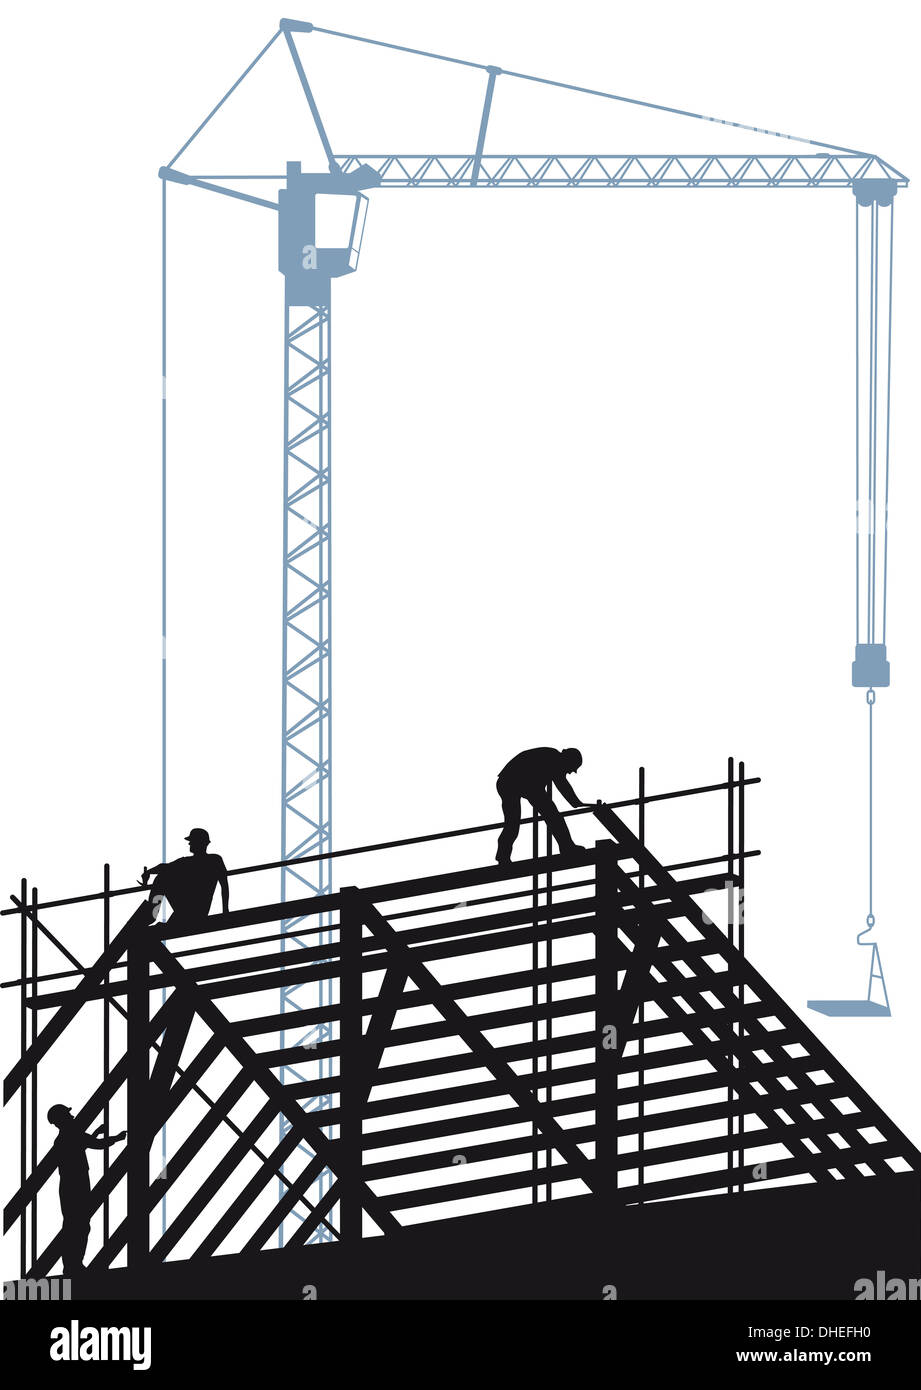 Construction site with crane Stock Photo